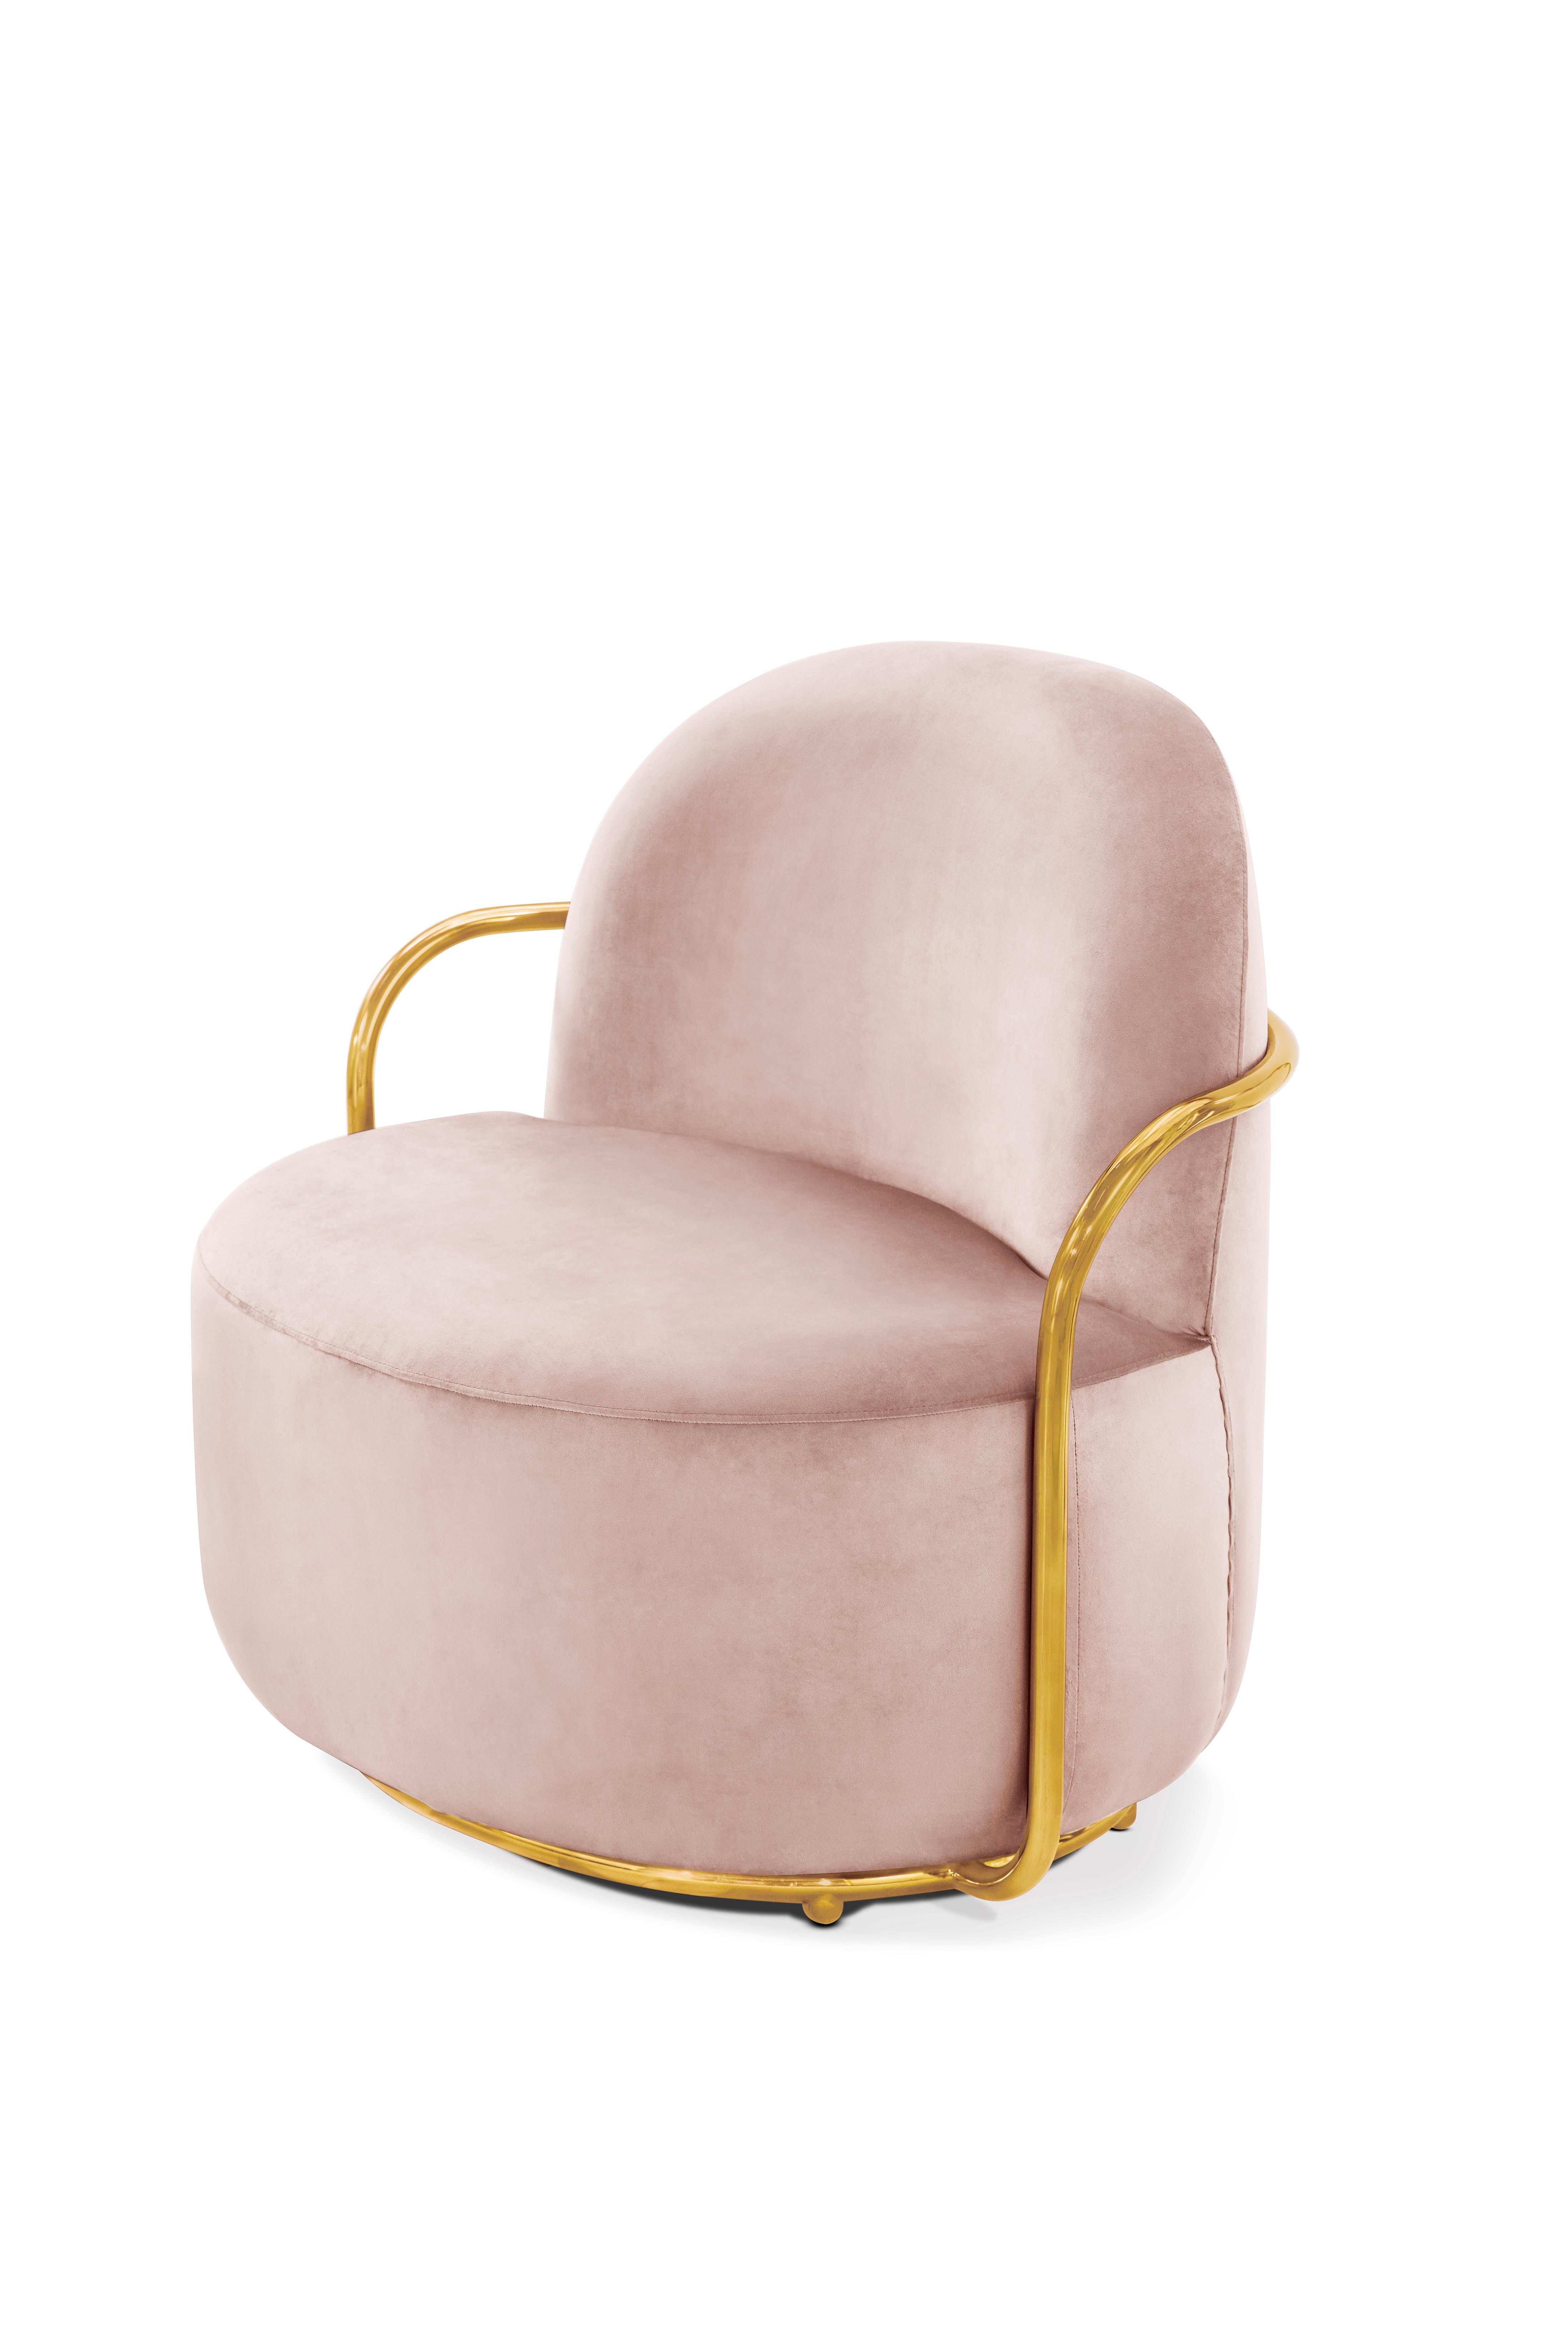 Orion Lounge Chair with Plush Pink Velvet and Gold Arms by Nika Zupanc makes a pretty picture in pale pink velvet and rich gold metal arms.

Nika Zupanc, a strikingly renowned Slovenian designer, never shies away from redefining the status quo of